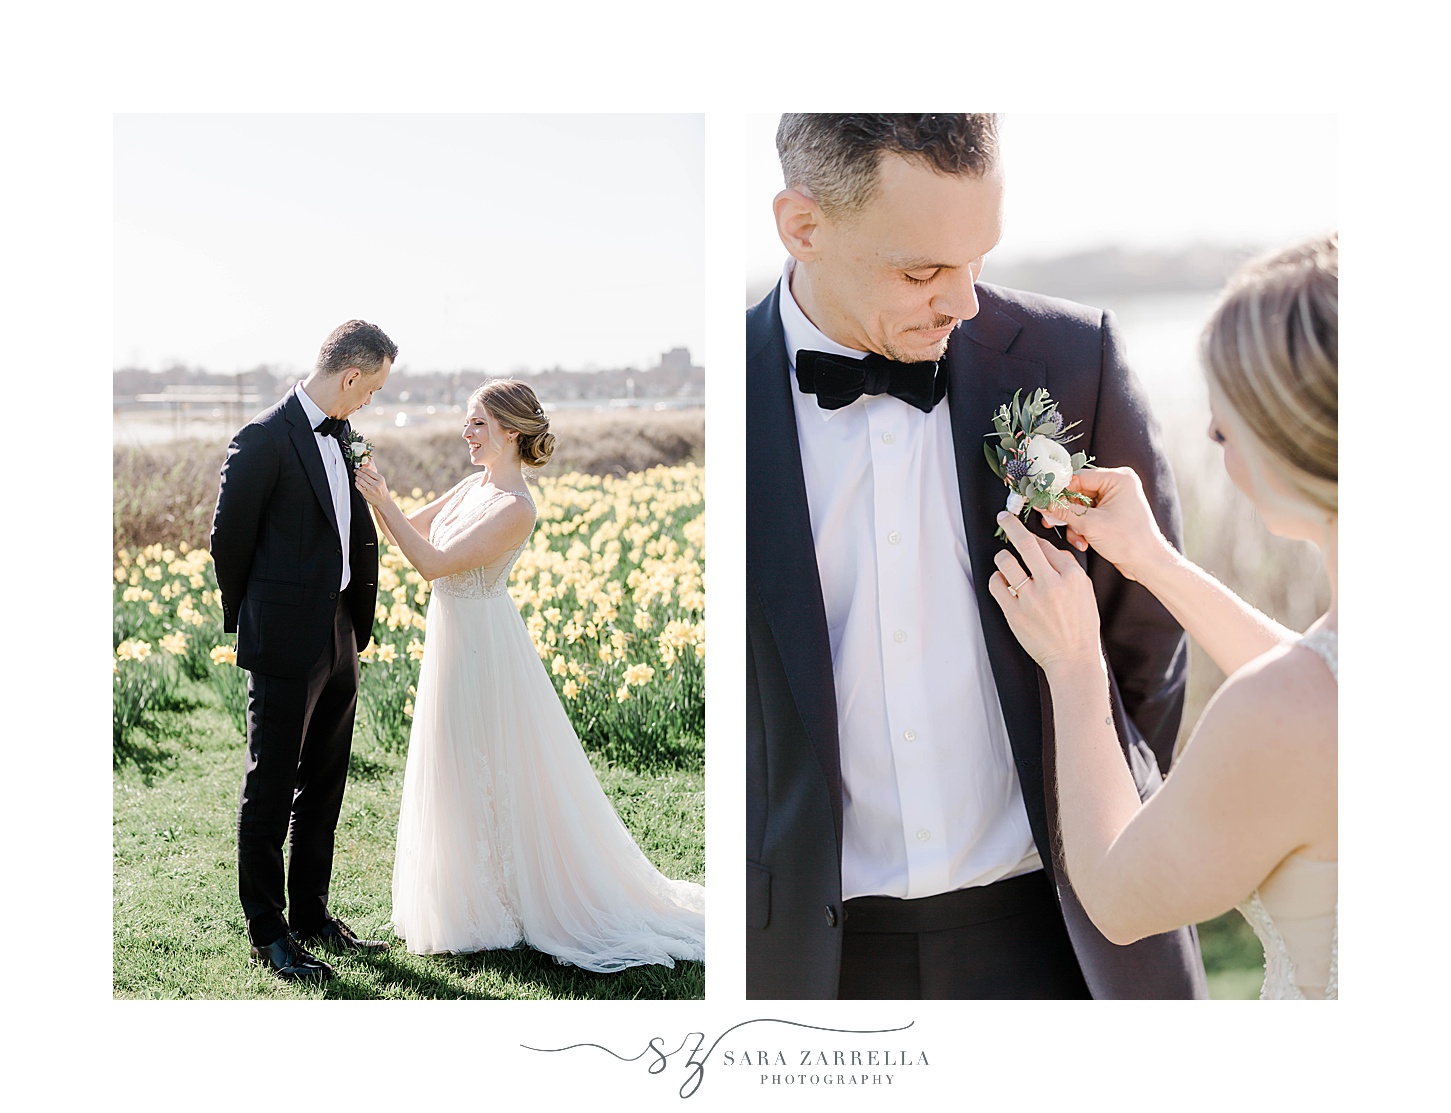 bride pins groom's boutonnière in field of daffodils  